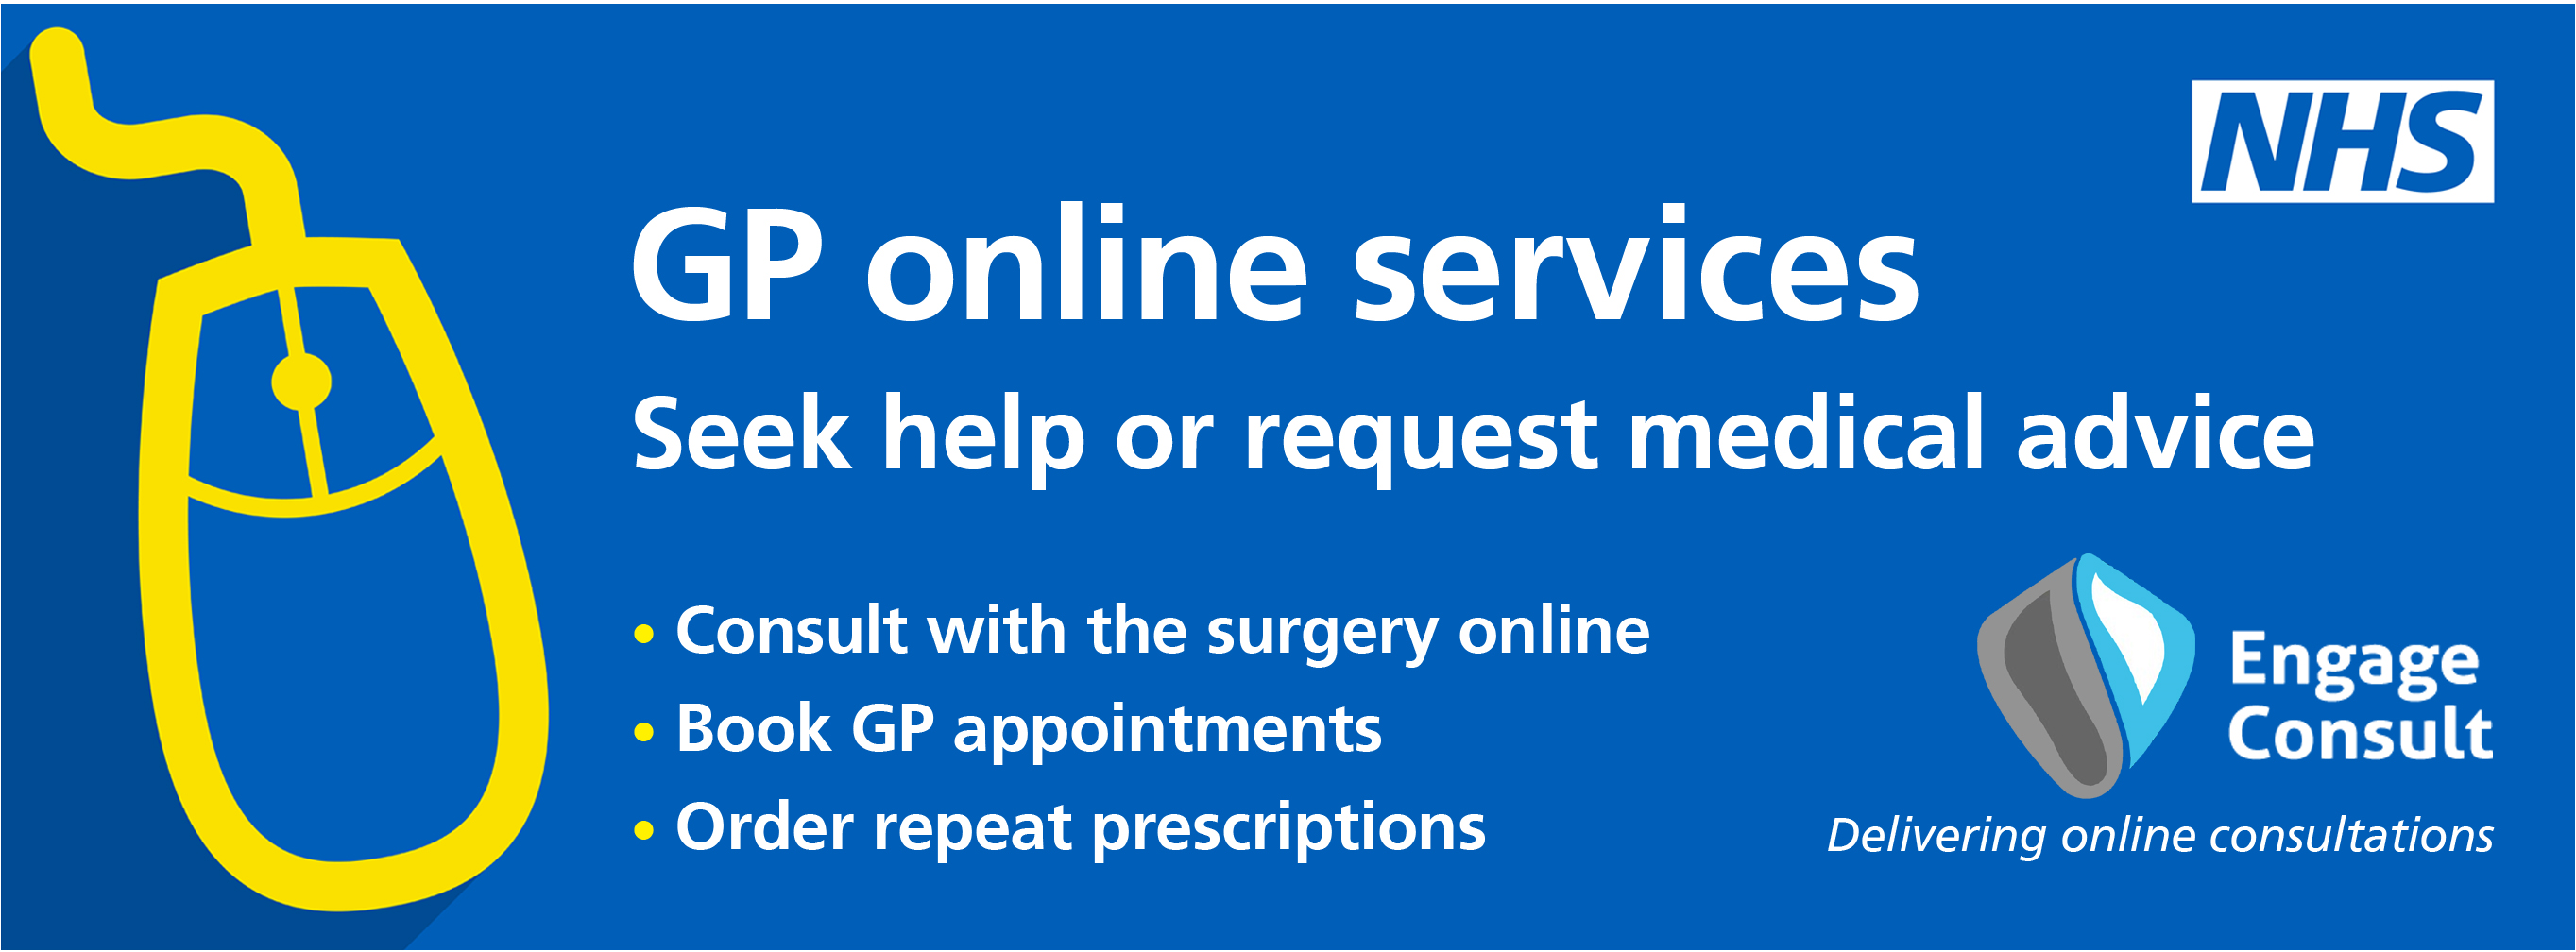 GP Online services seek help or request medical advice consult with the surgery online book gp appointments order repeat prescriptions engage consult delivering online consultations